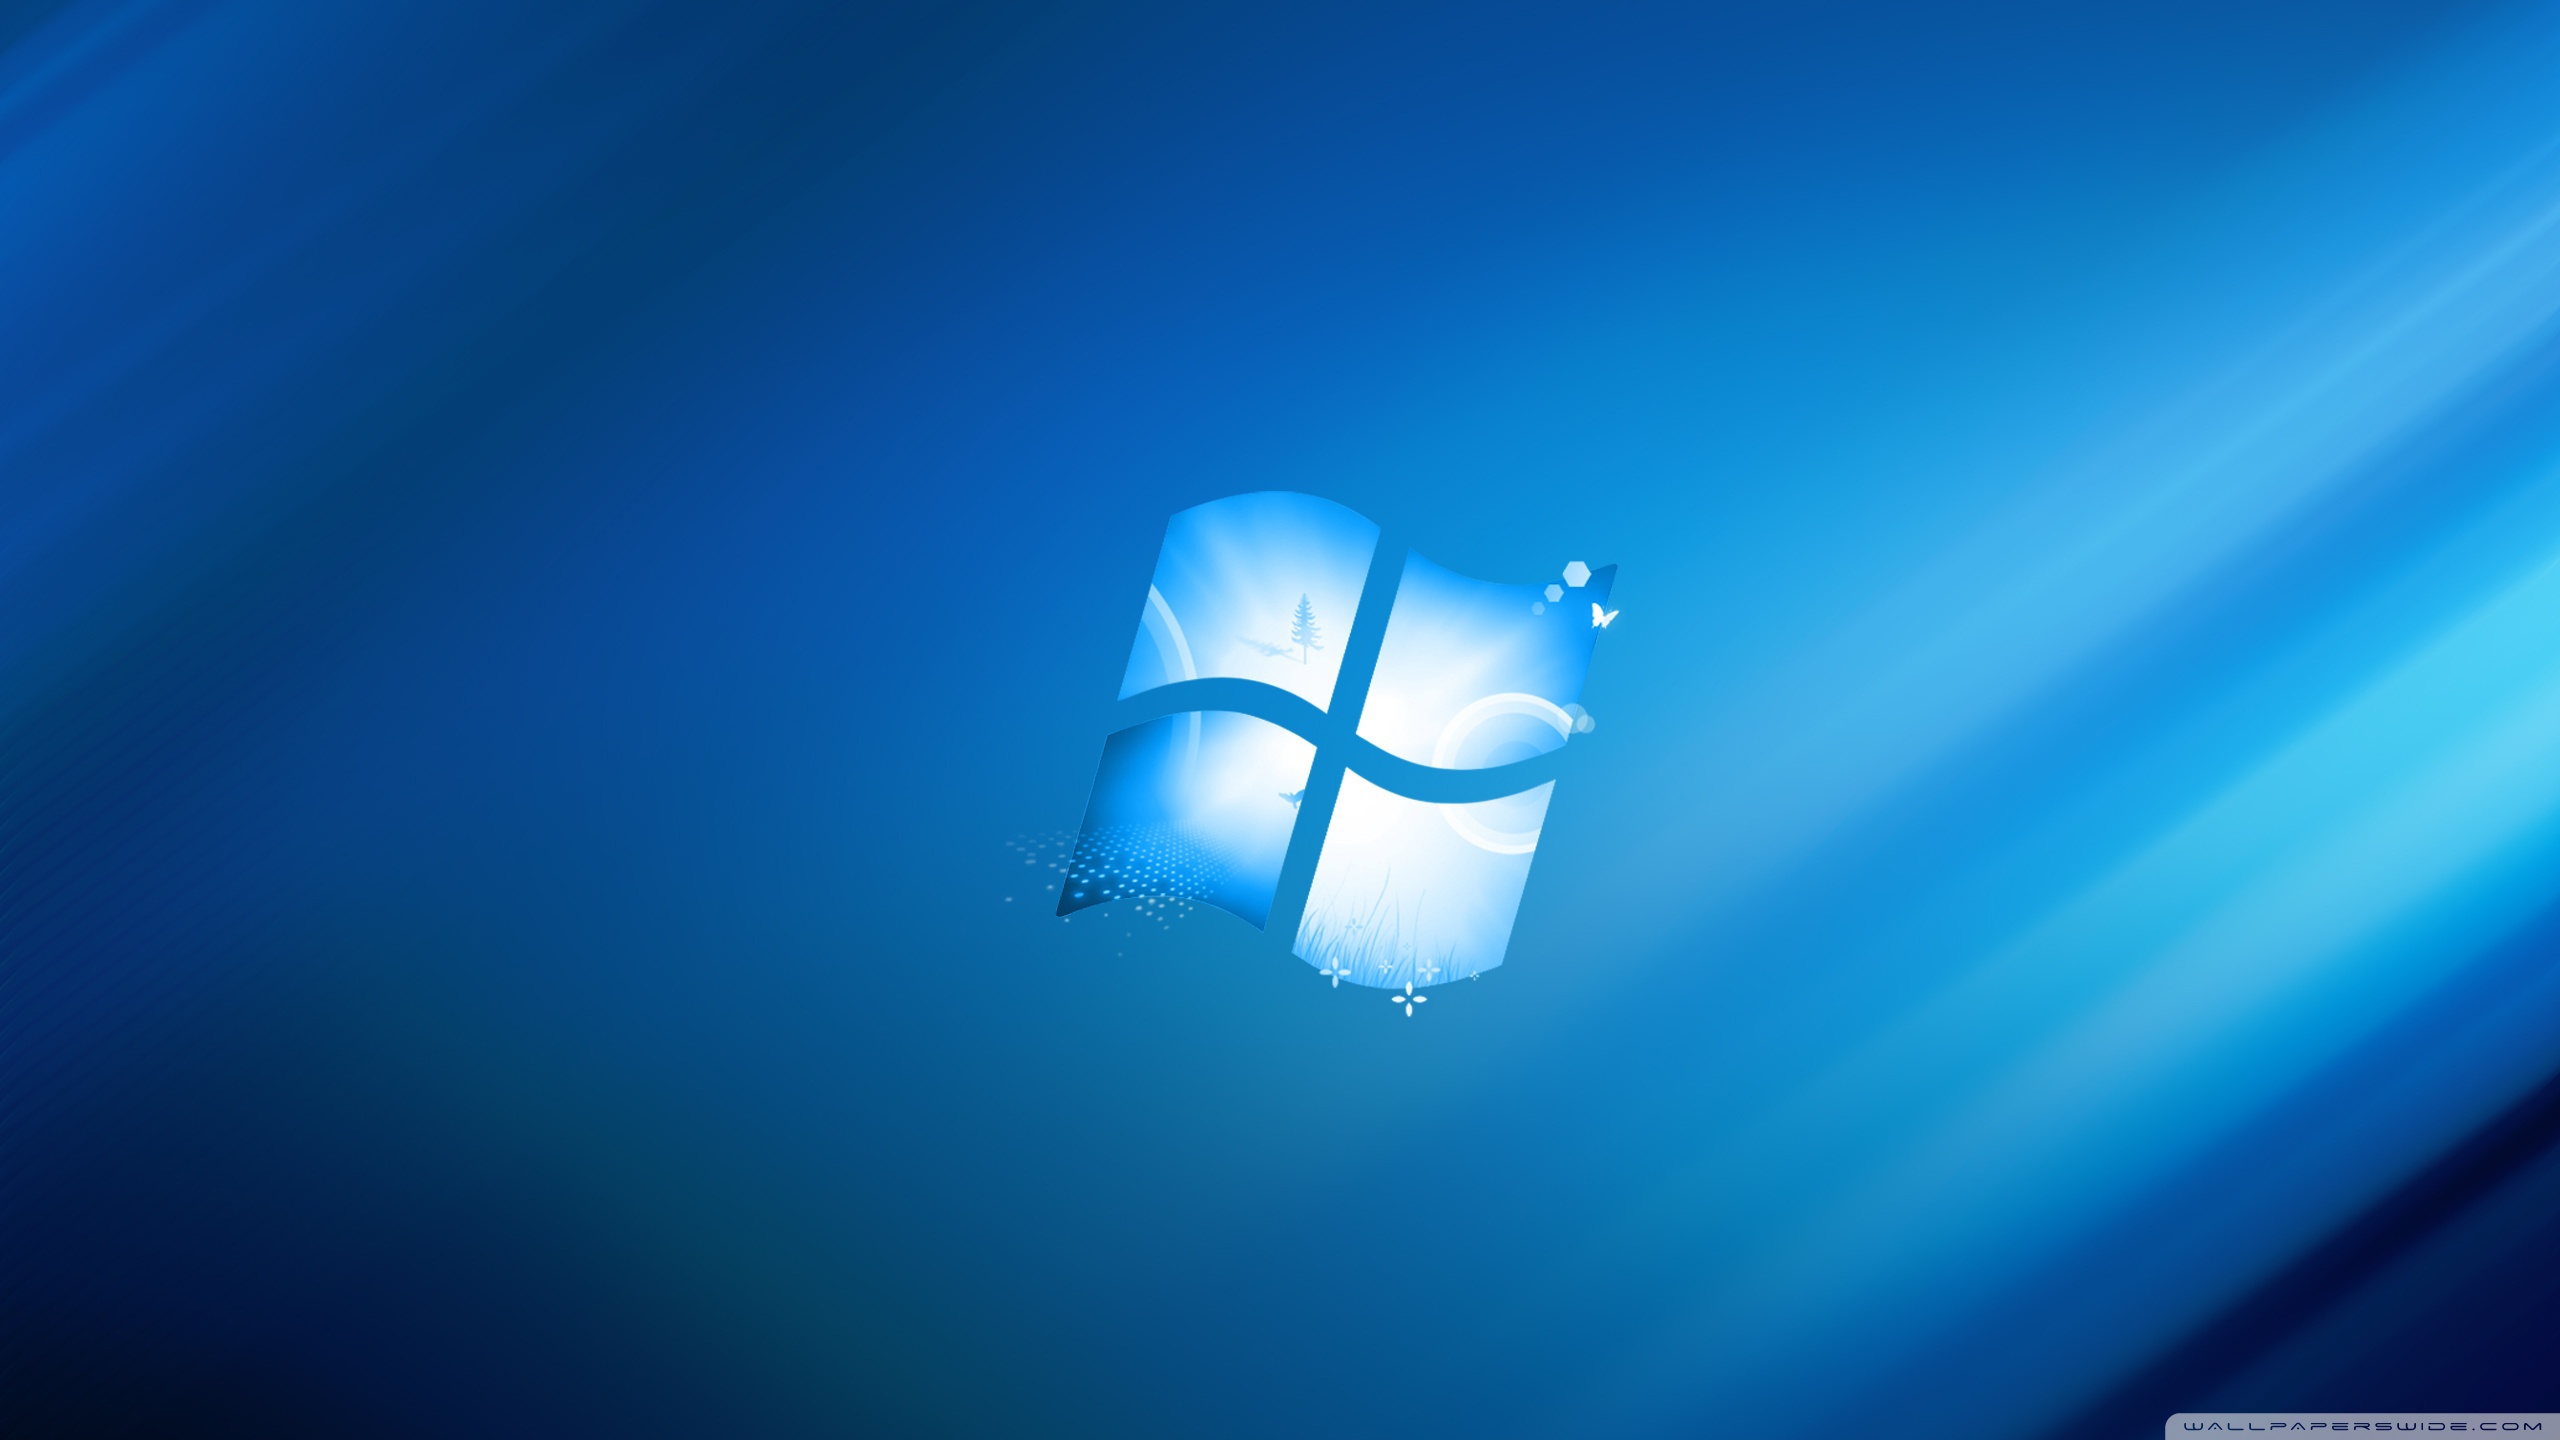 Windows 8 blue theme wallpapers and images   wallpapers pictures